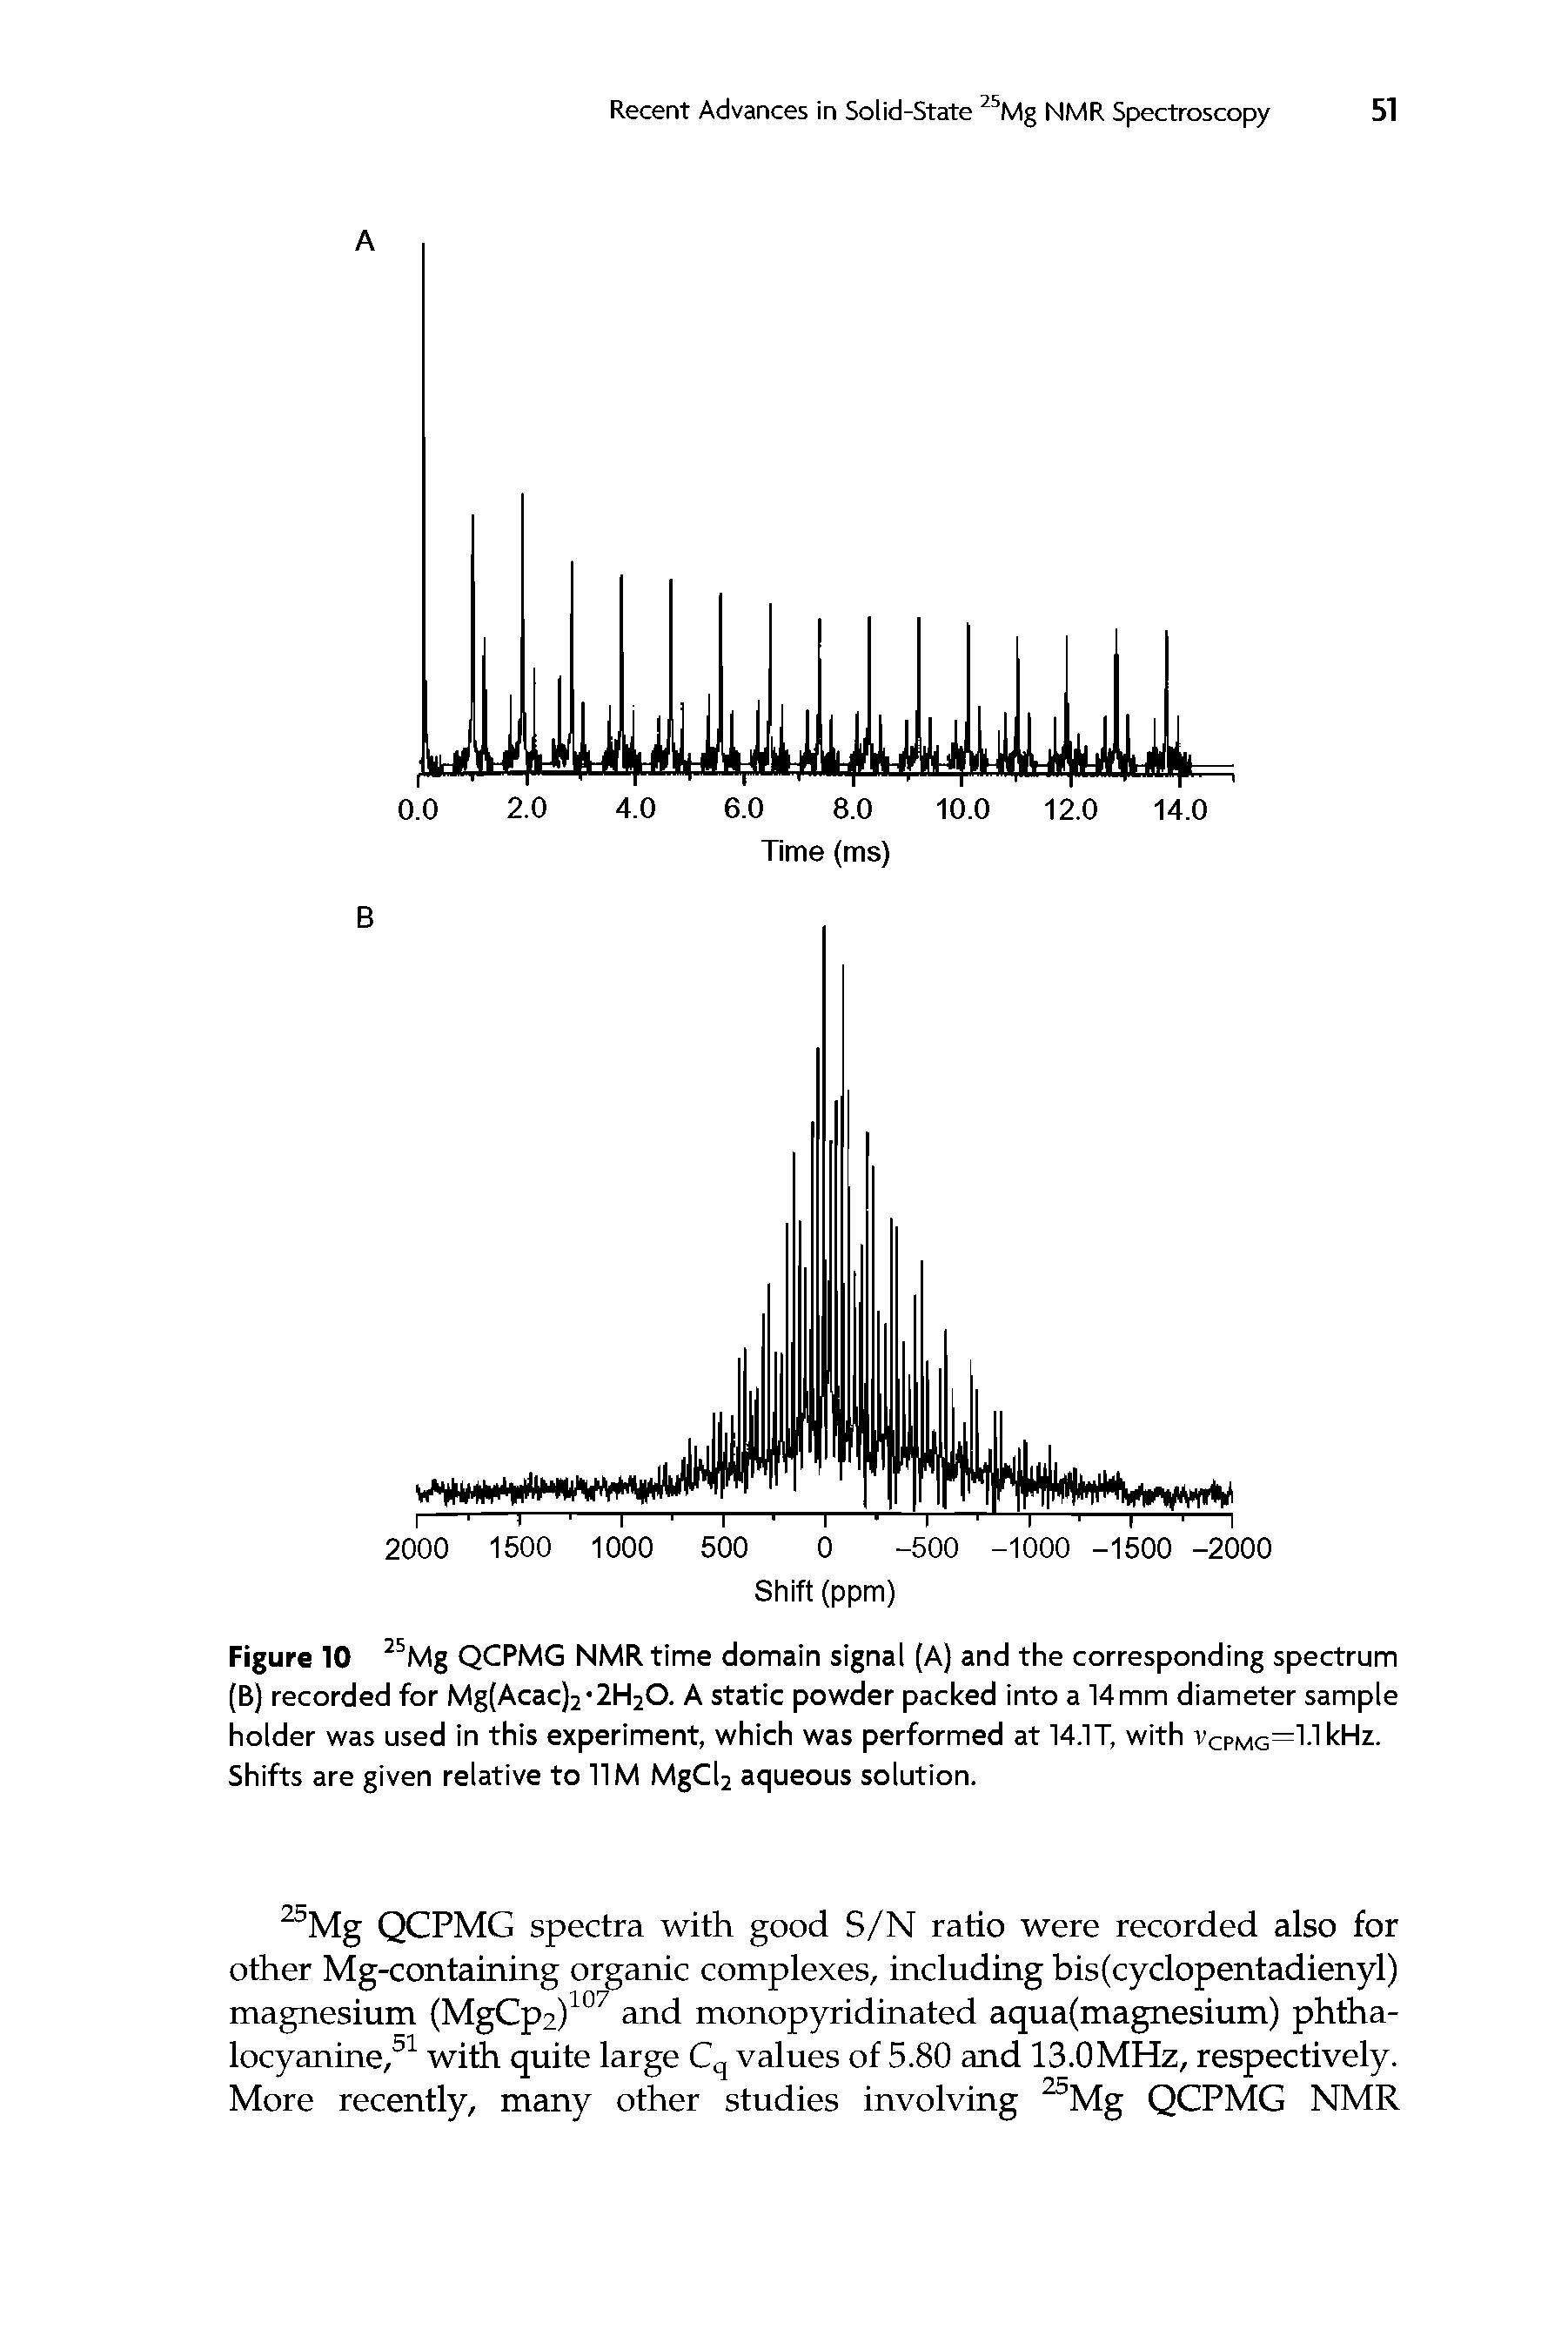 Figure 10 QCPMG NMR time domain signal (A) and the corresponding spectrum...